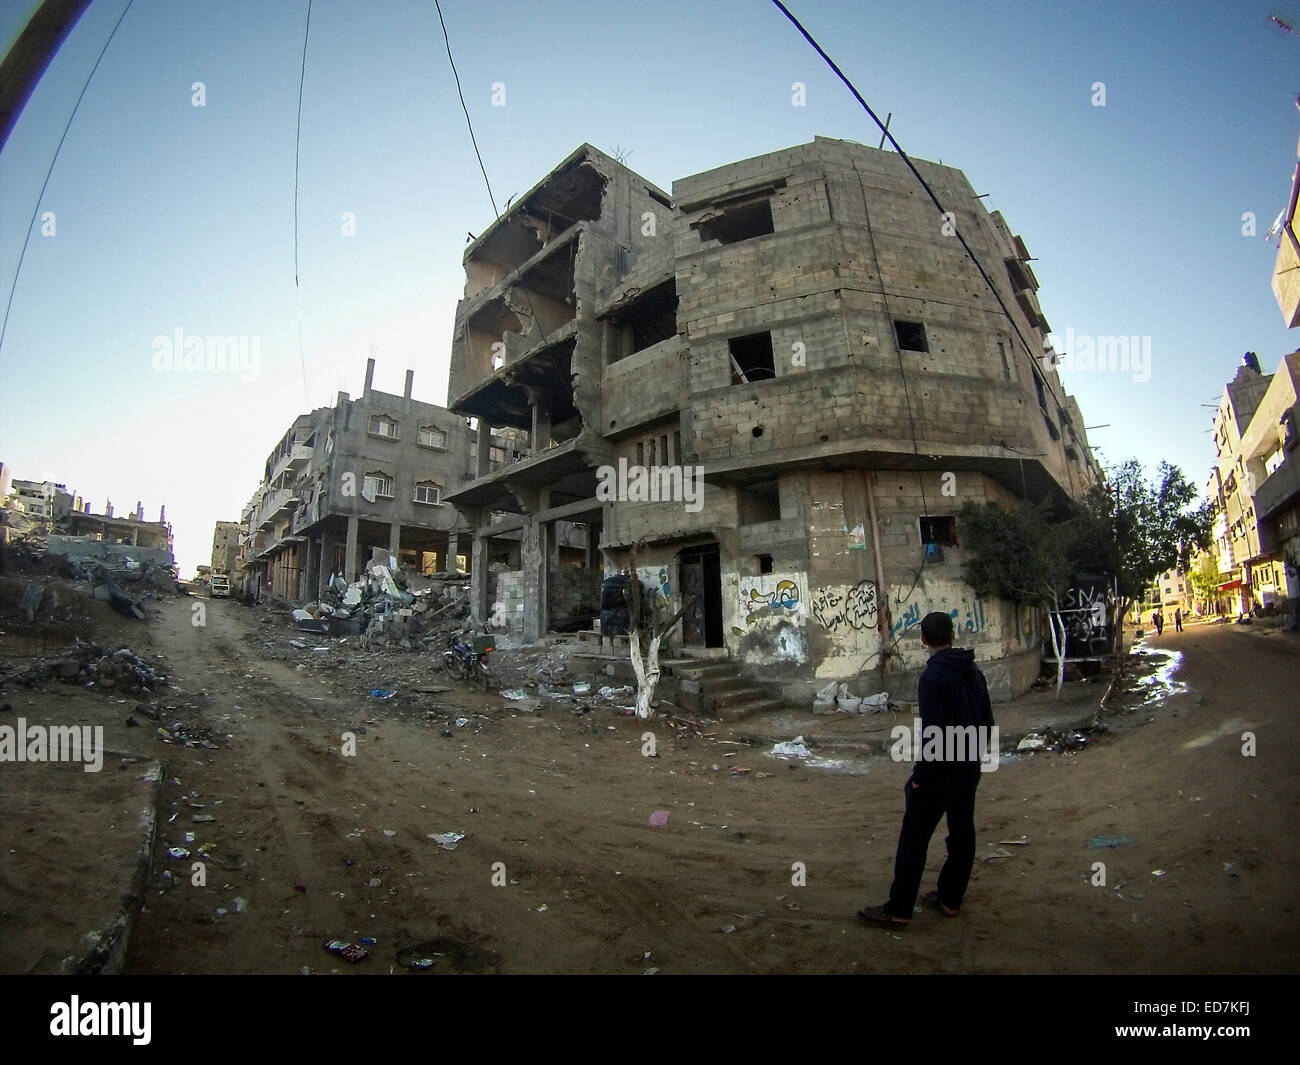 Shujayea in the Gaza Strip. Bombed by Israel during 'Operation Protective Edge'. Stock Photo